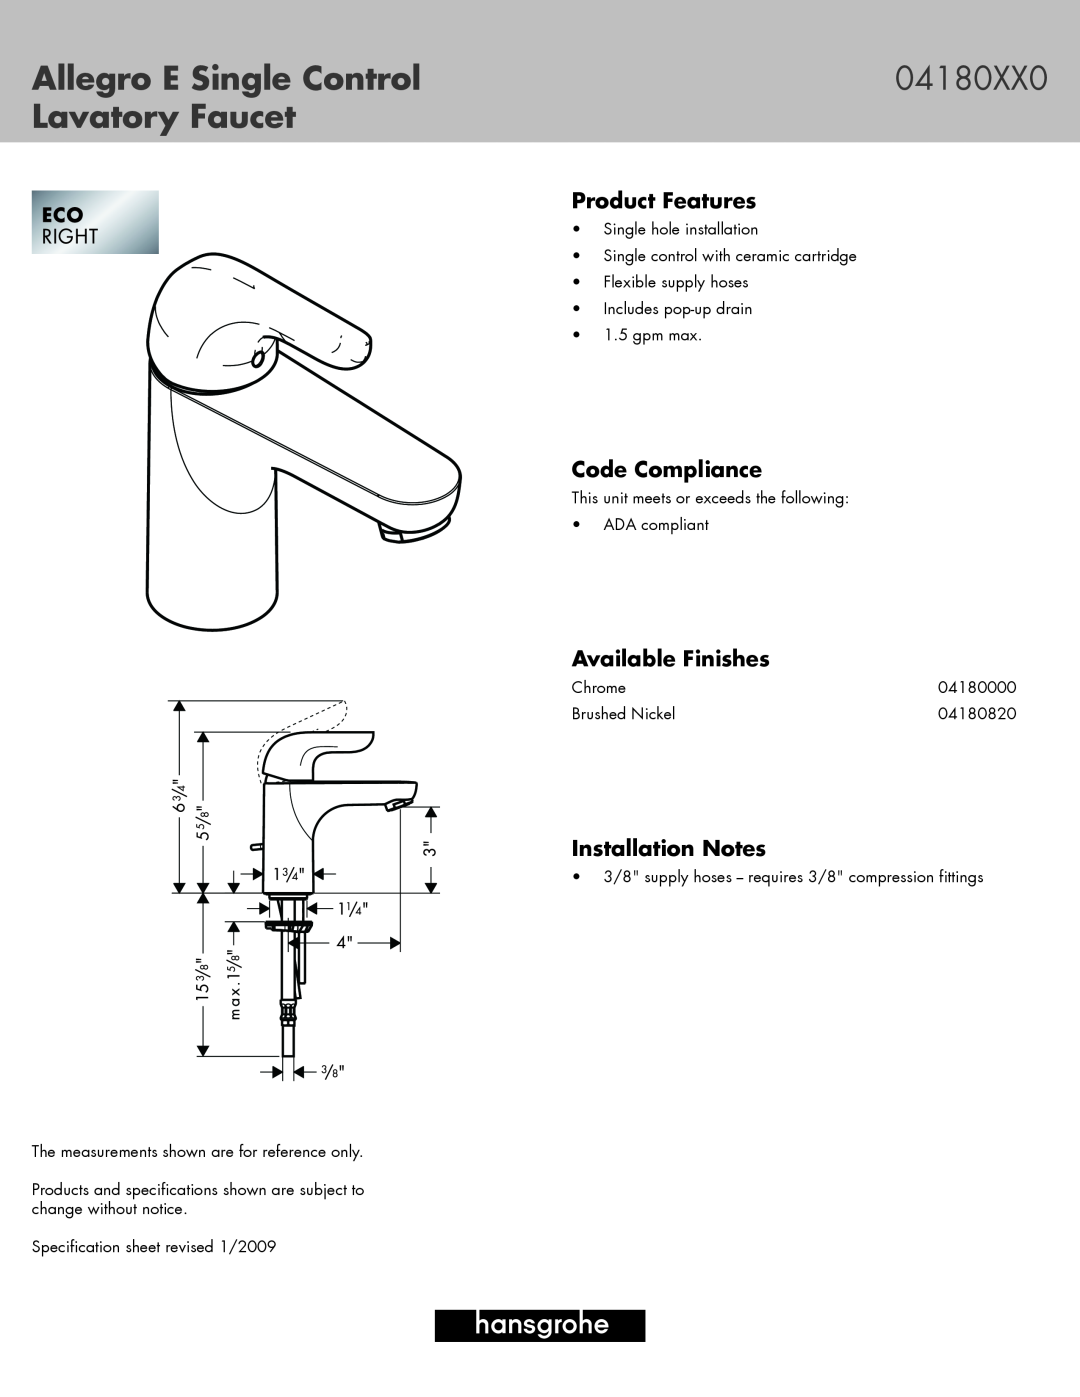 Hans Grohe 04180XX0 specifications Allegro E Single Control, Lavatory Faucet, Product Features, Code Compliance 